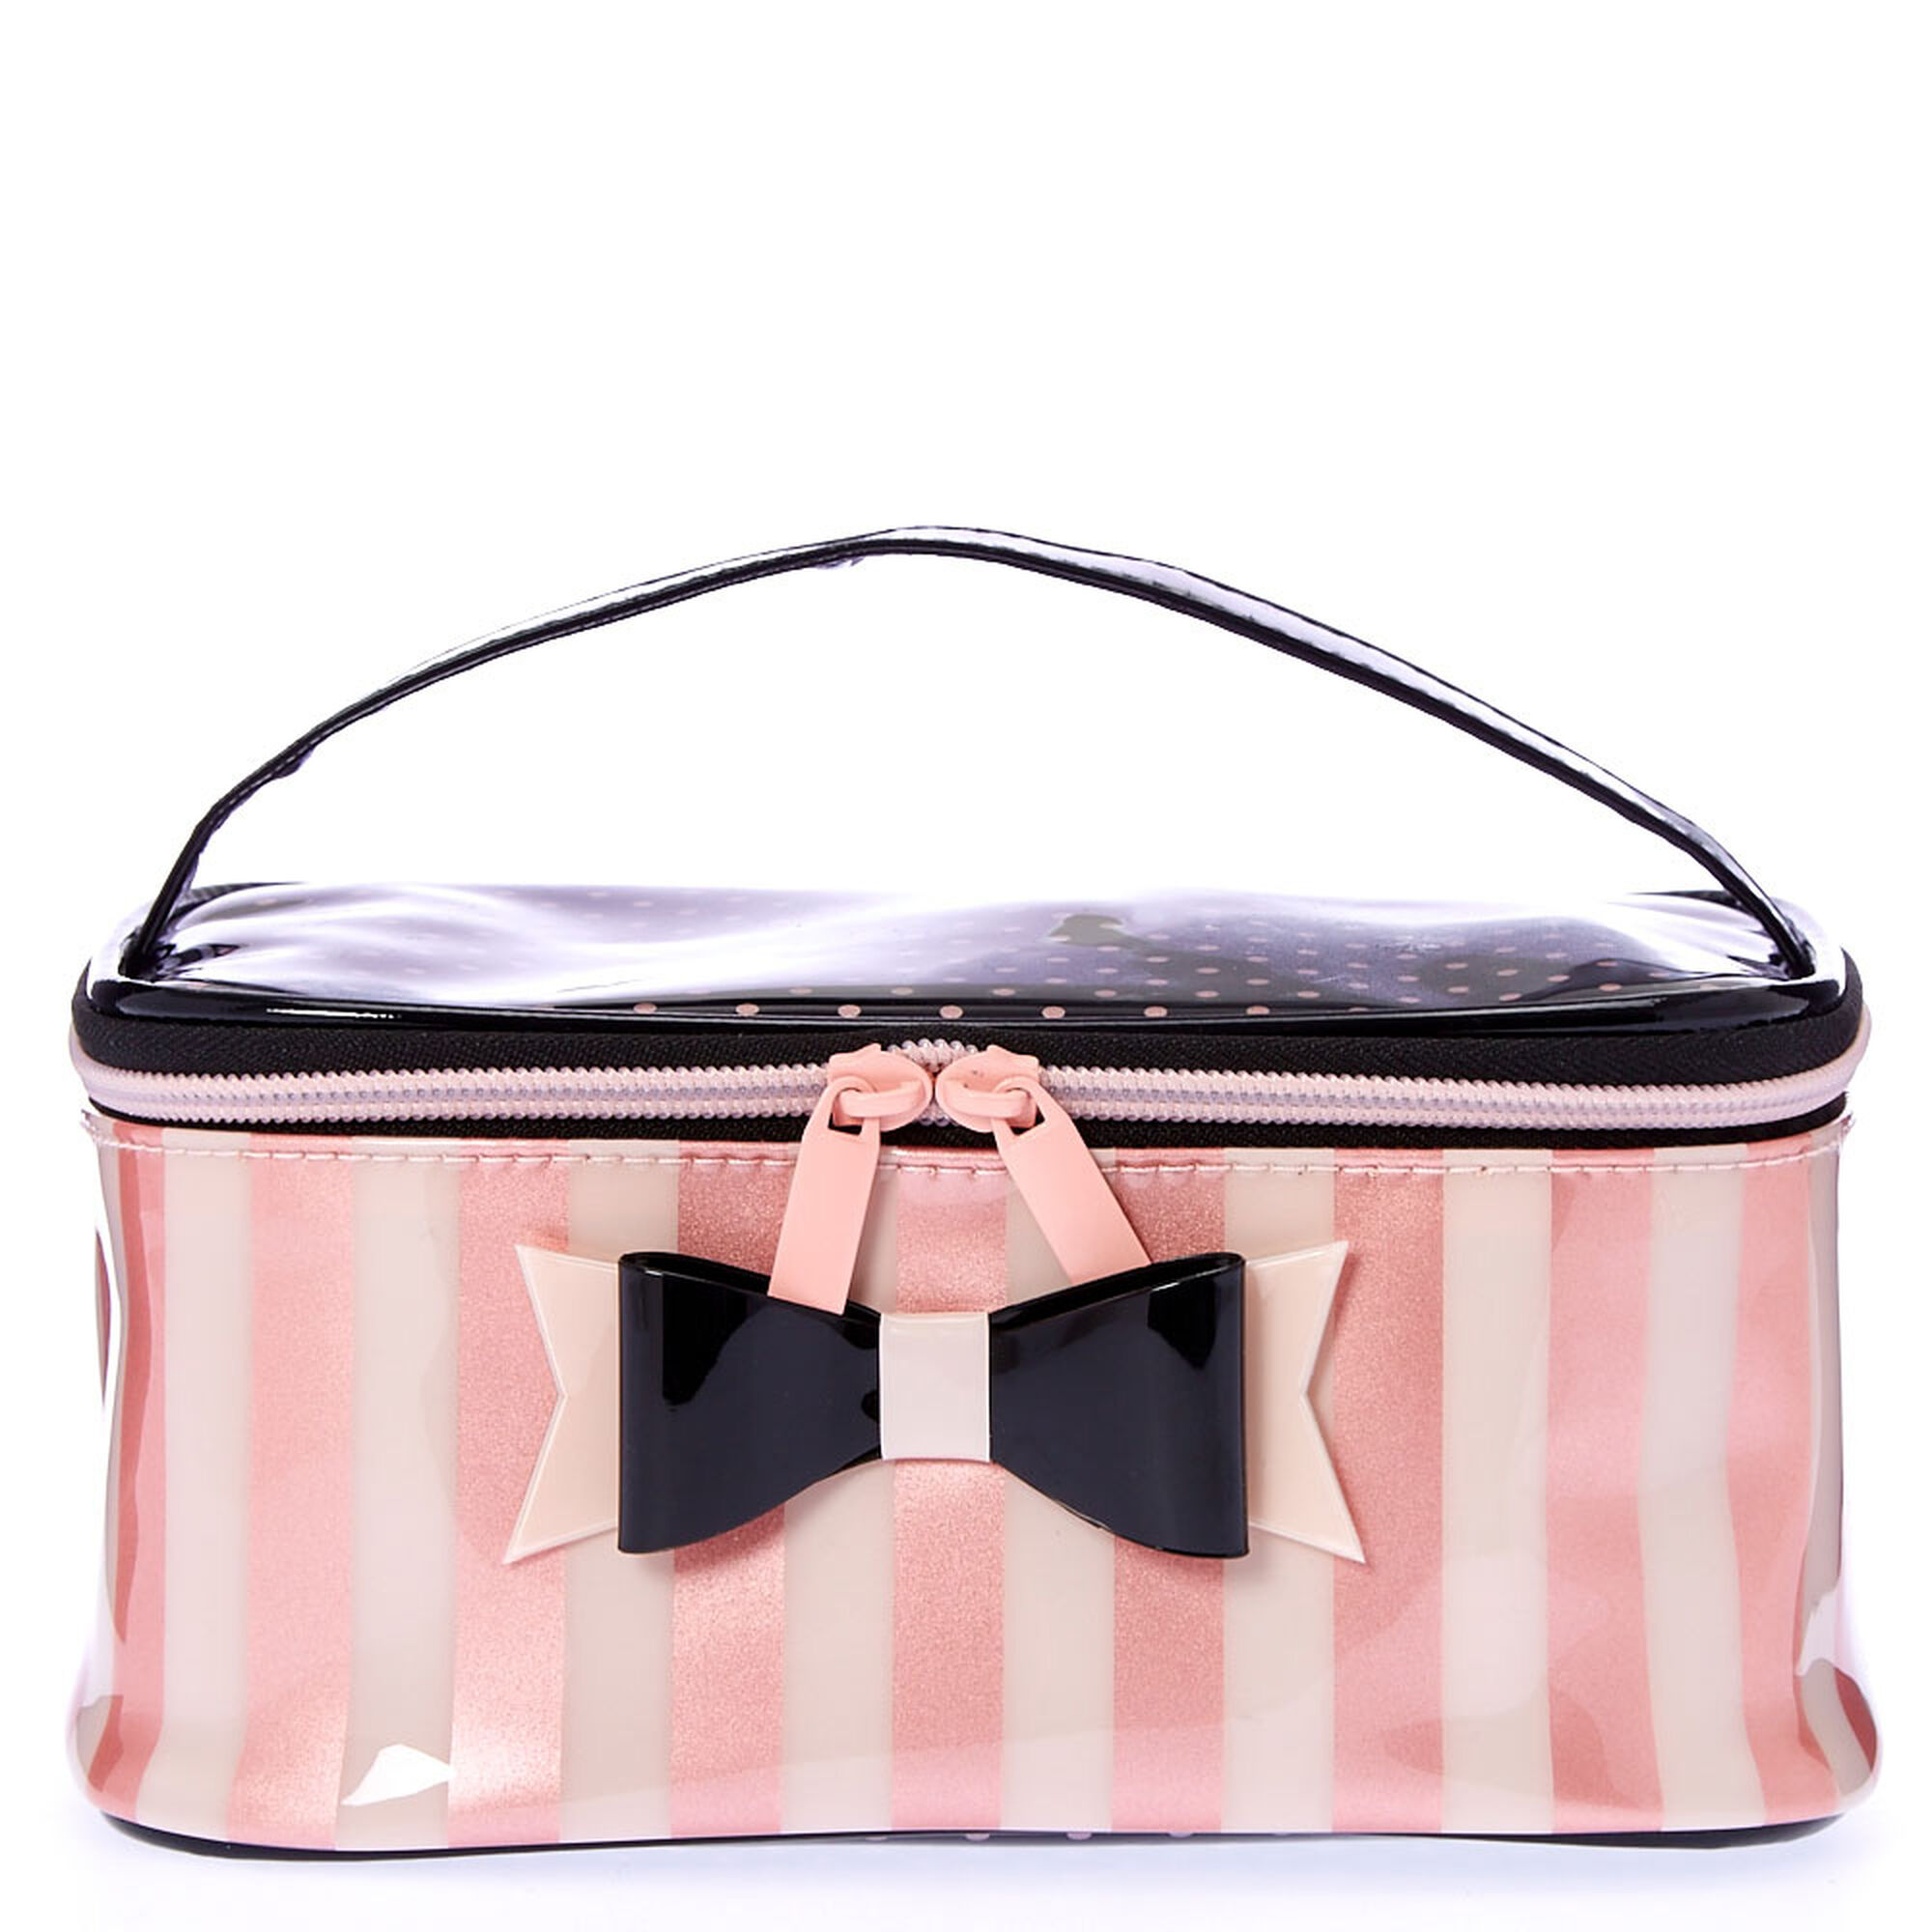 Cosmetic Bags Black Small Polka Dot Pink Background PU Leather Makeup  Organizer for Women Teen Girls